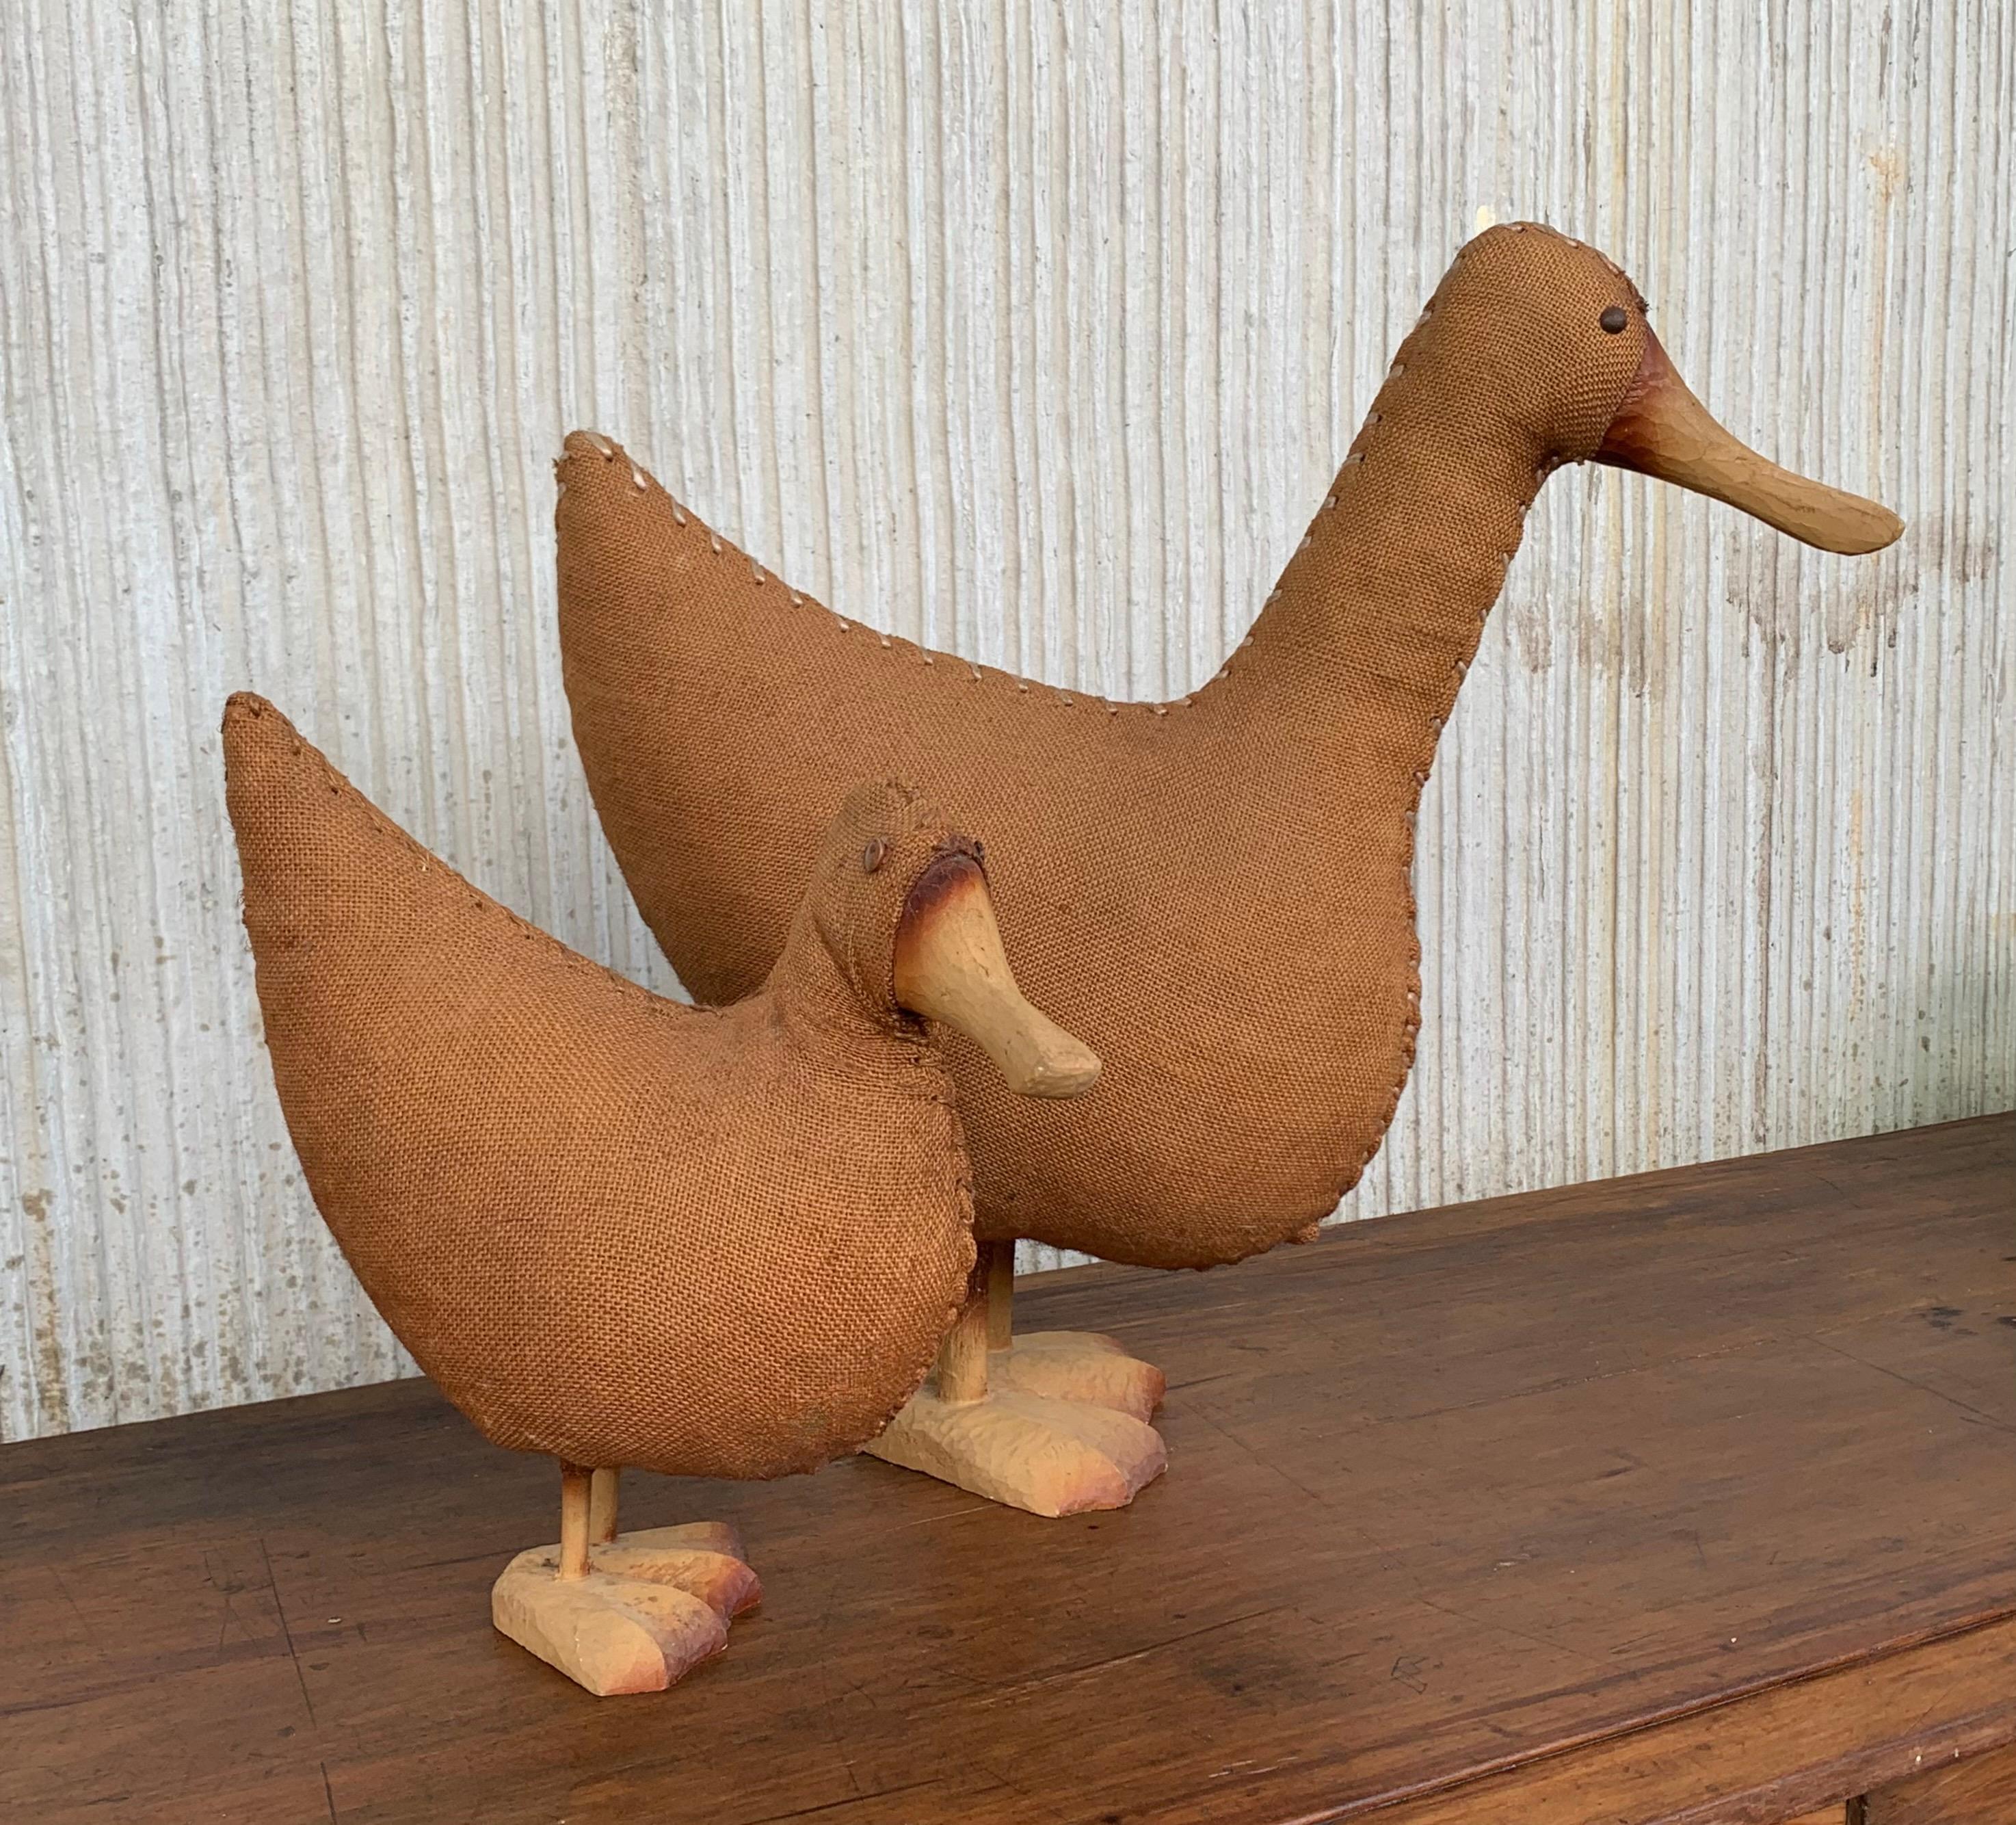 Wicker duck from with an intricate woven wicker structure and highlighted with wood wings and a sculpted bill and feet.